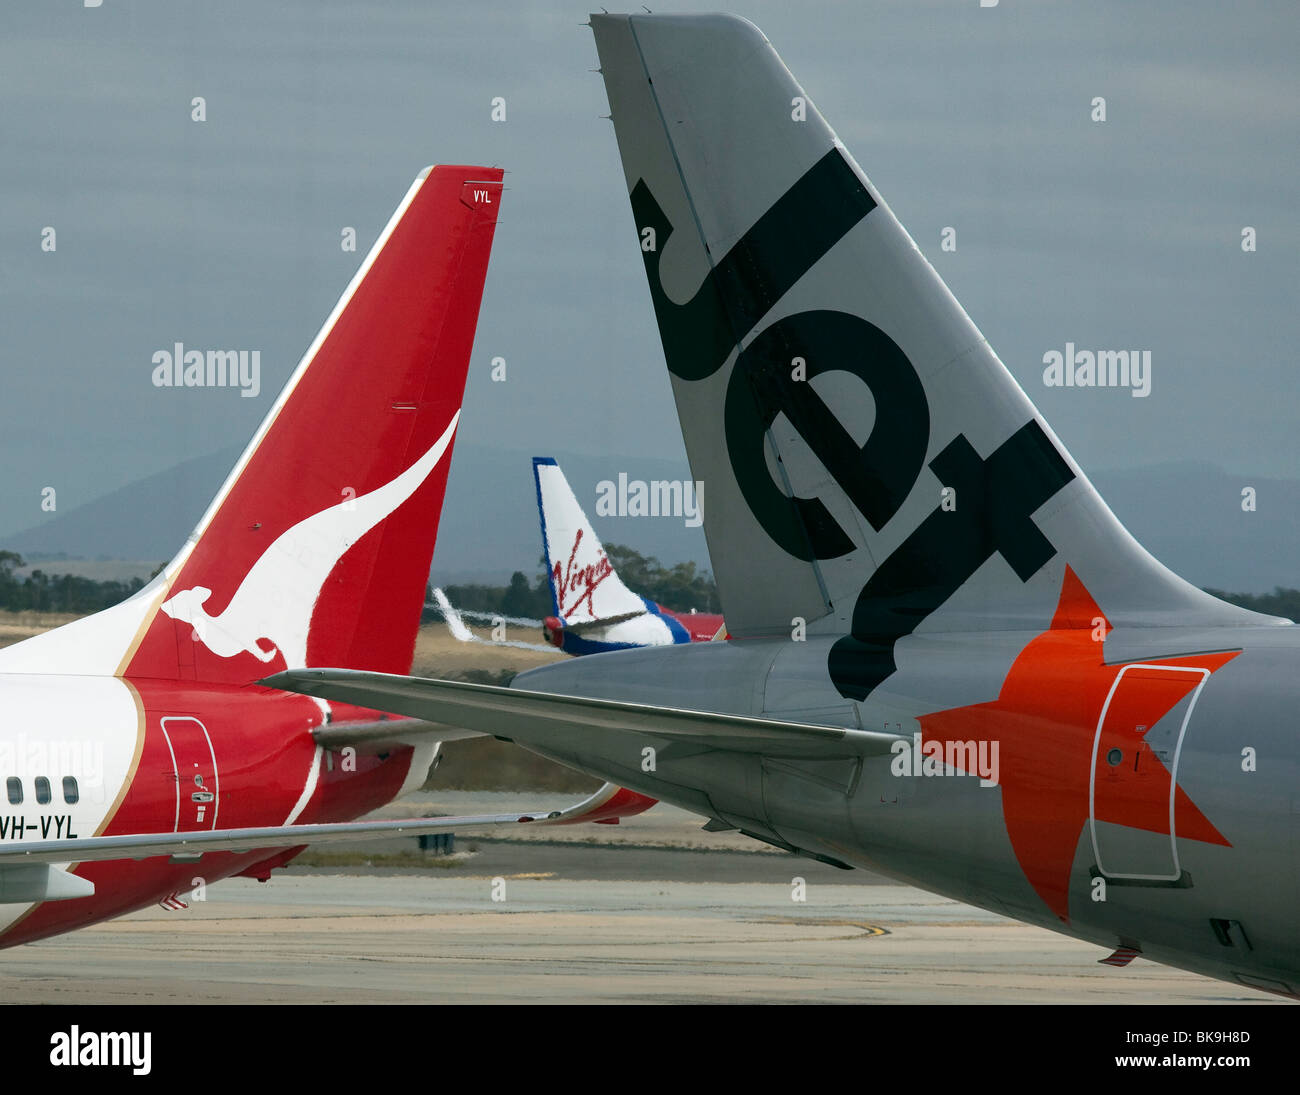 Tails of budget airline and Qantas aircraft at an Australian airport Stock Photo